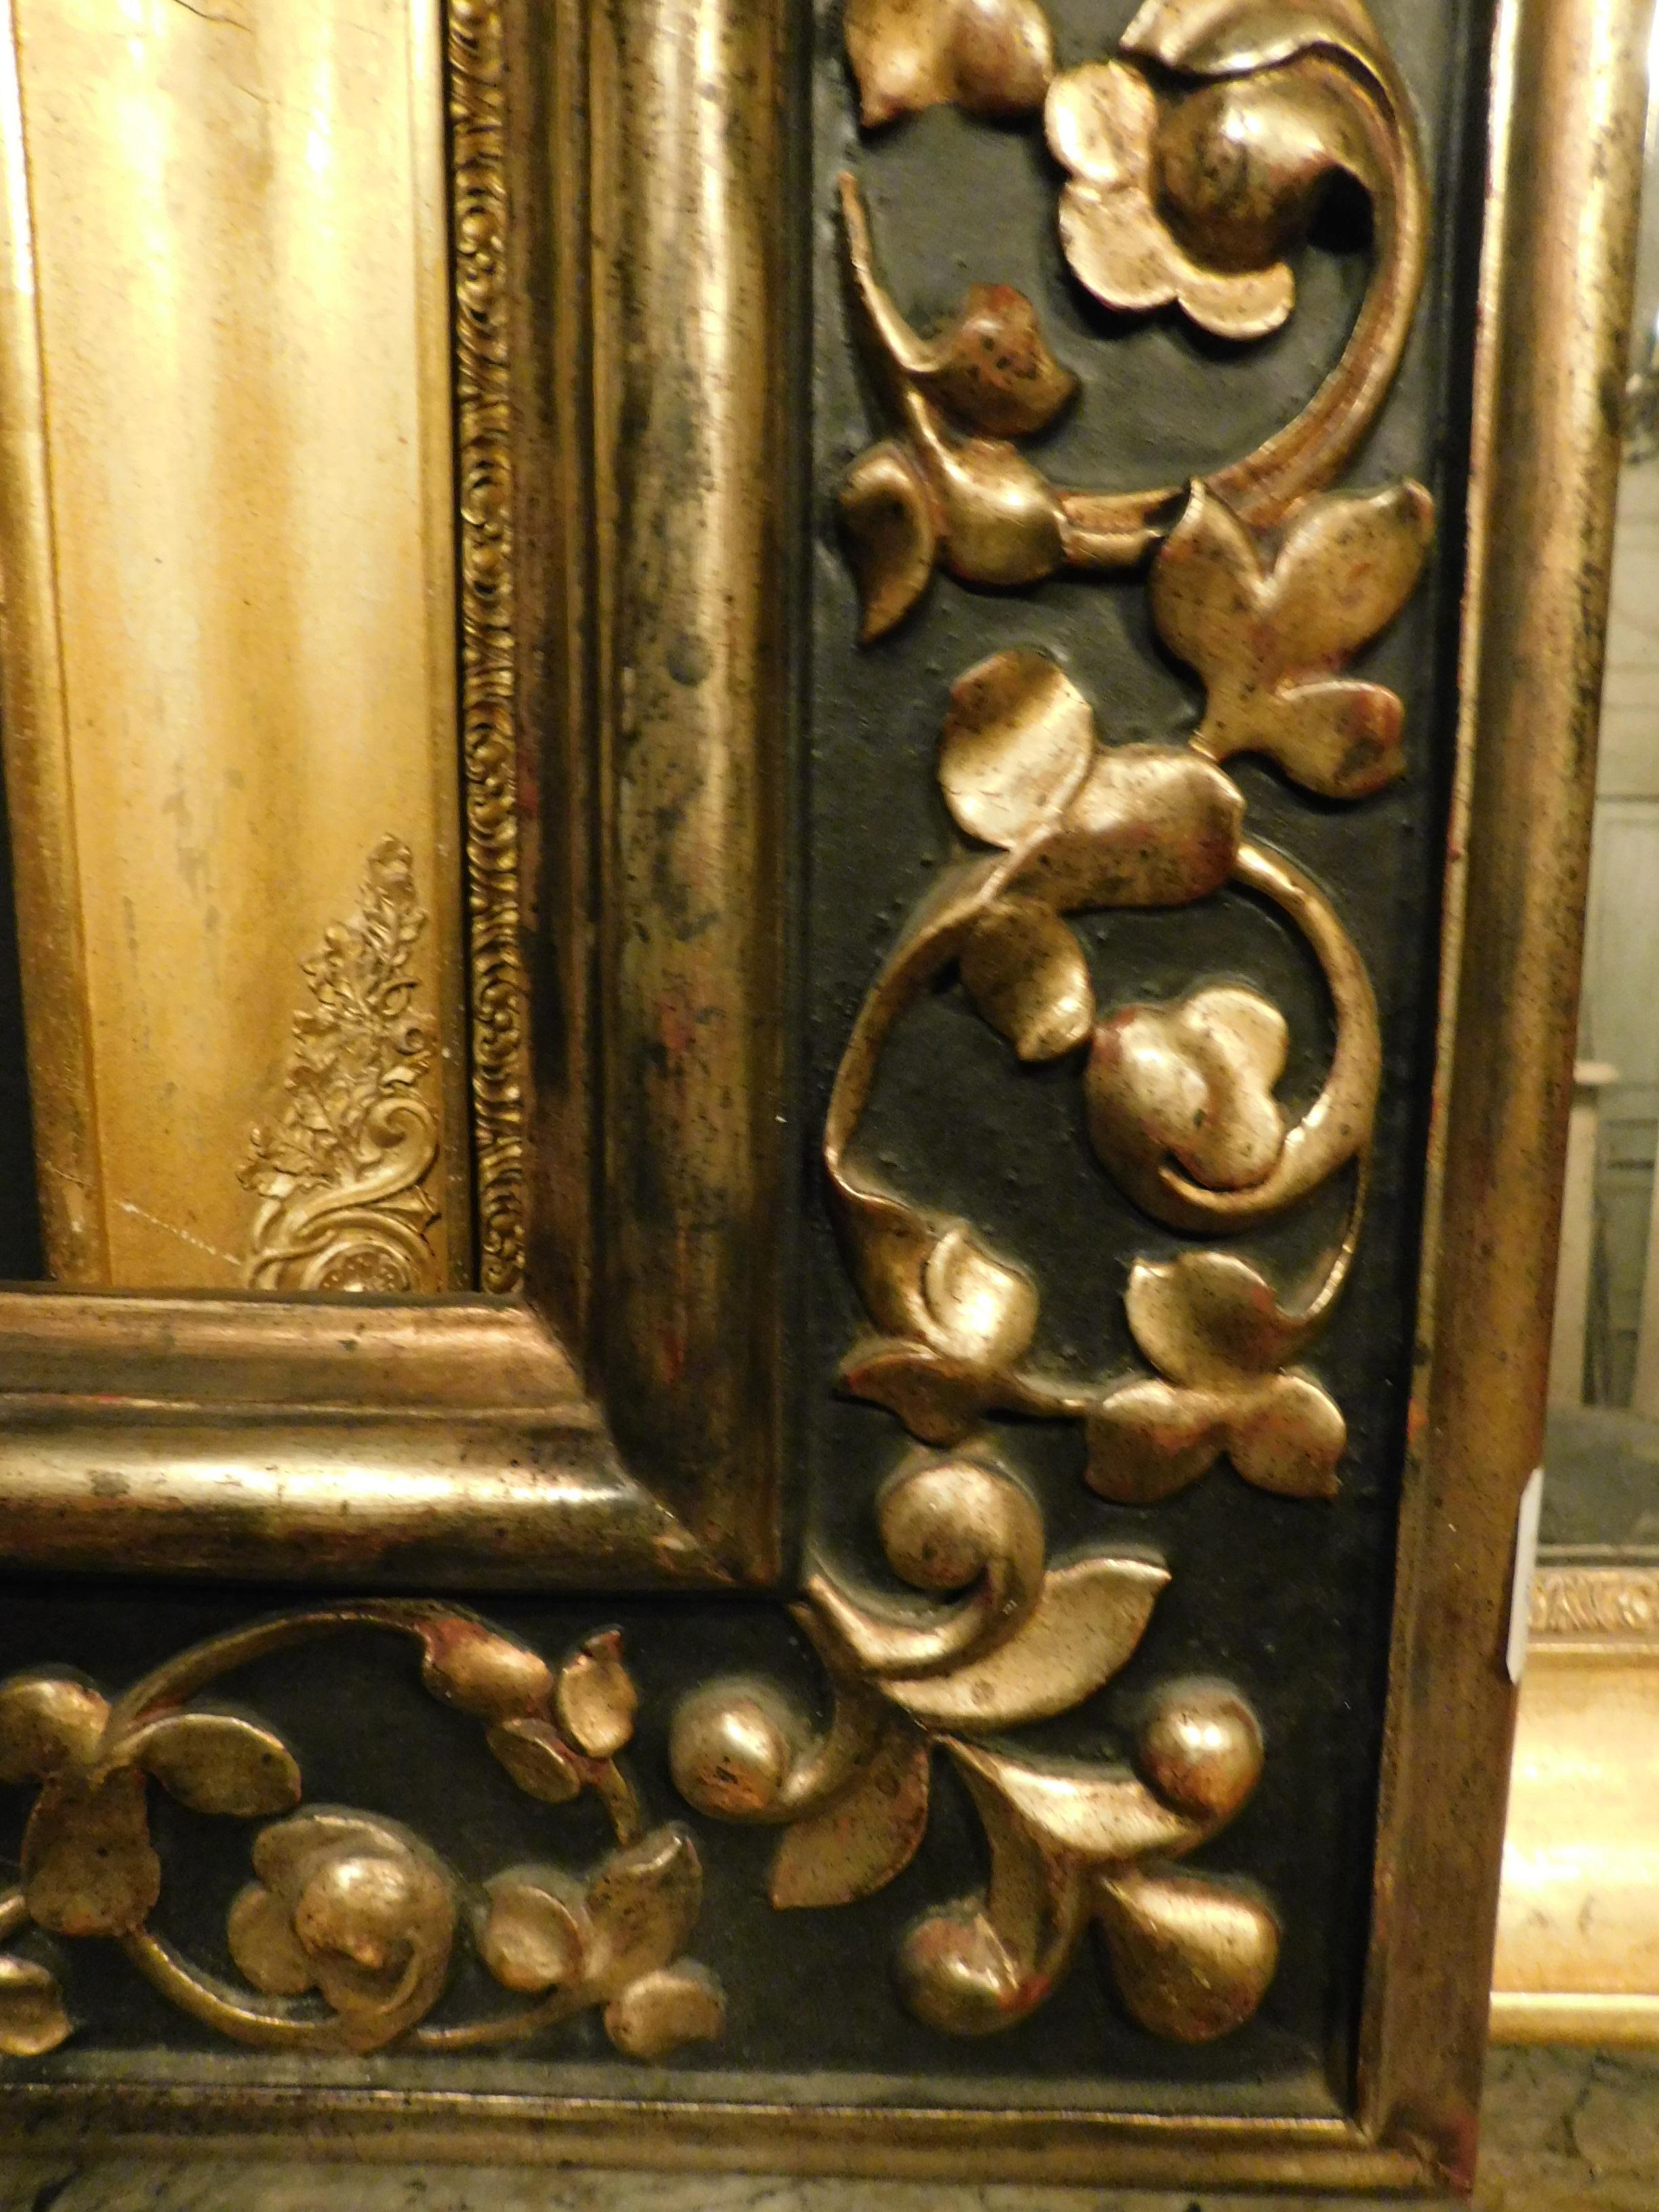 19th Century Antique Frame Carved and Decorated with Golden Floral Motifs 1